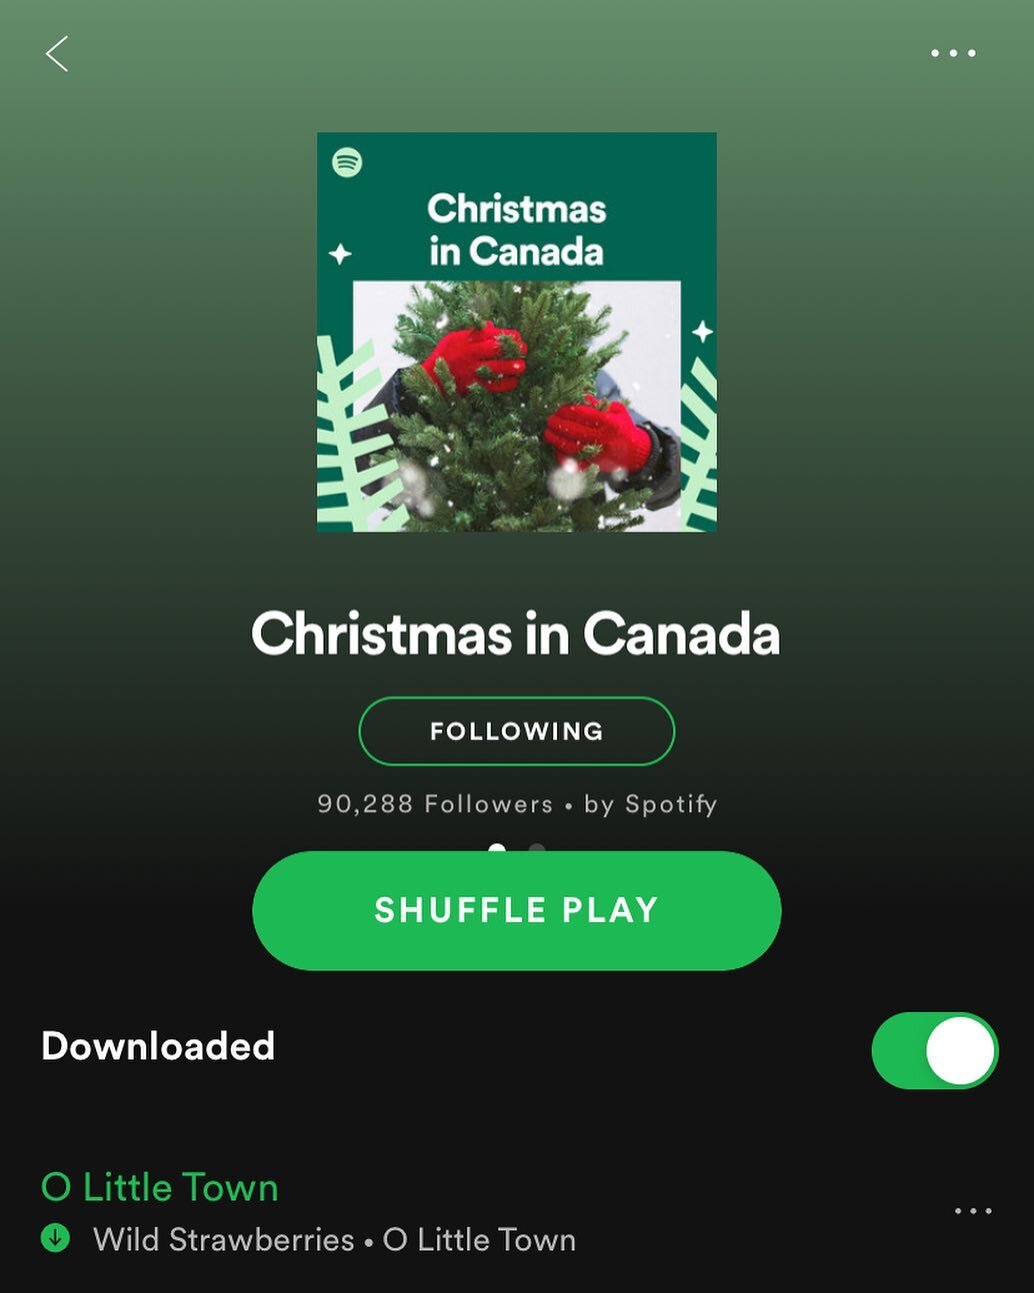 Excited to see our cover of &ldquo;O Little Town&rdquo; on a Spotify curated playlist called Christmas in Canada. Link in bio!